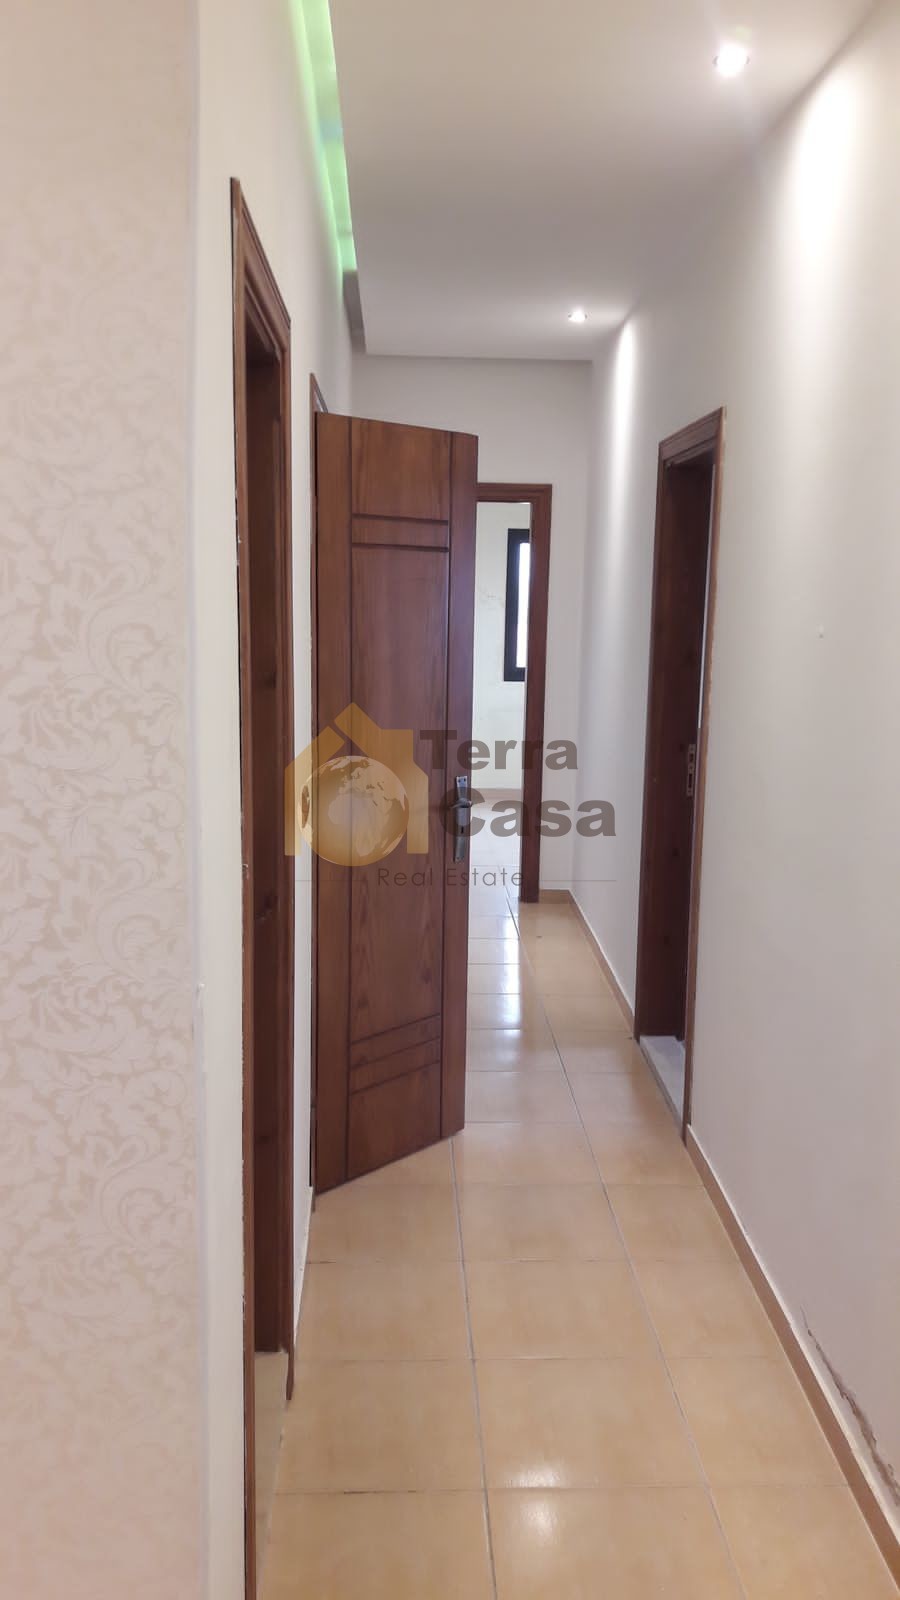 Zahle Moualaka decorated apartment for sale